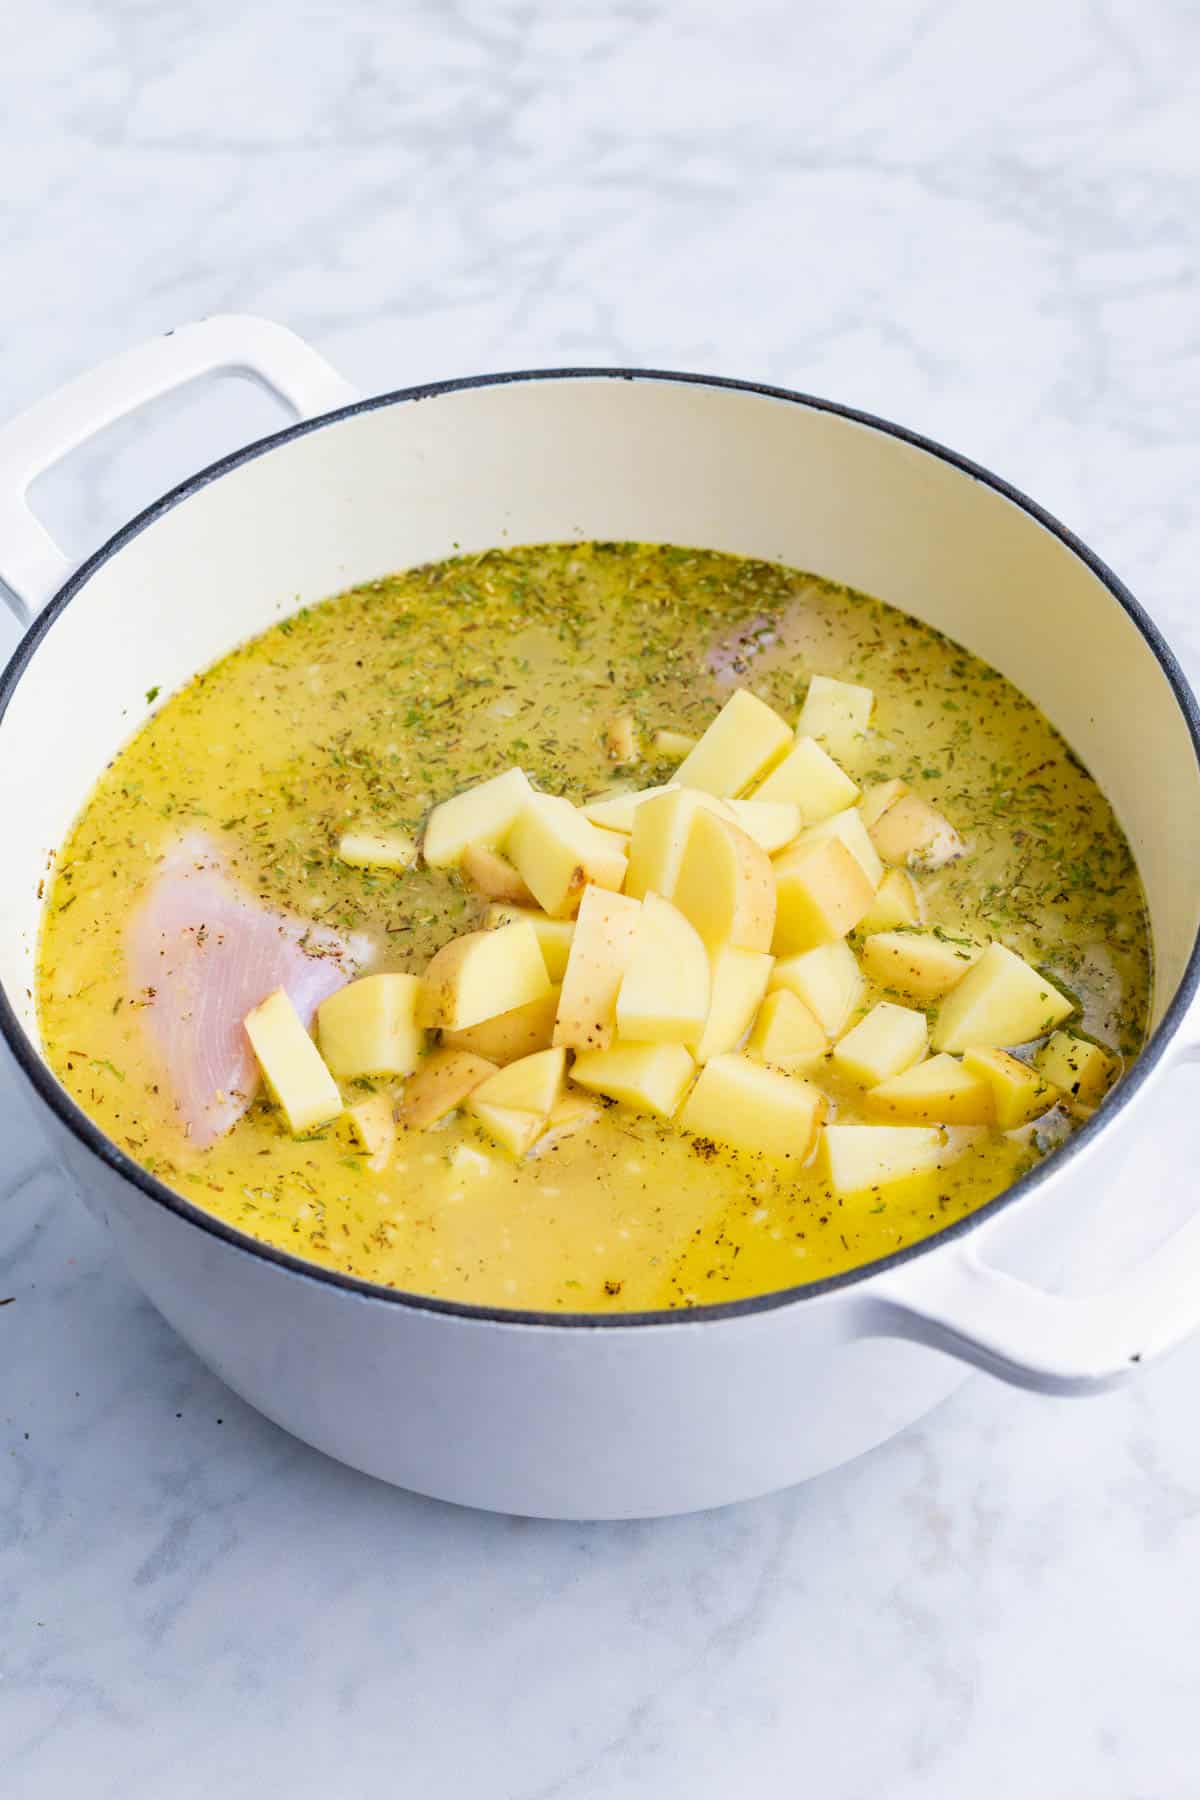 Potatoes, chicken, and herbs are added to the broth mixture.